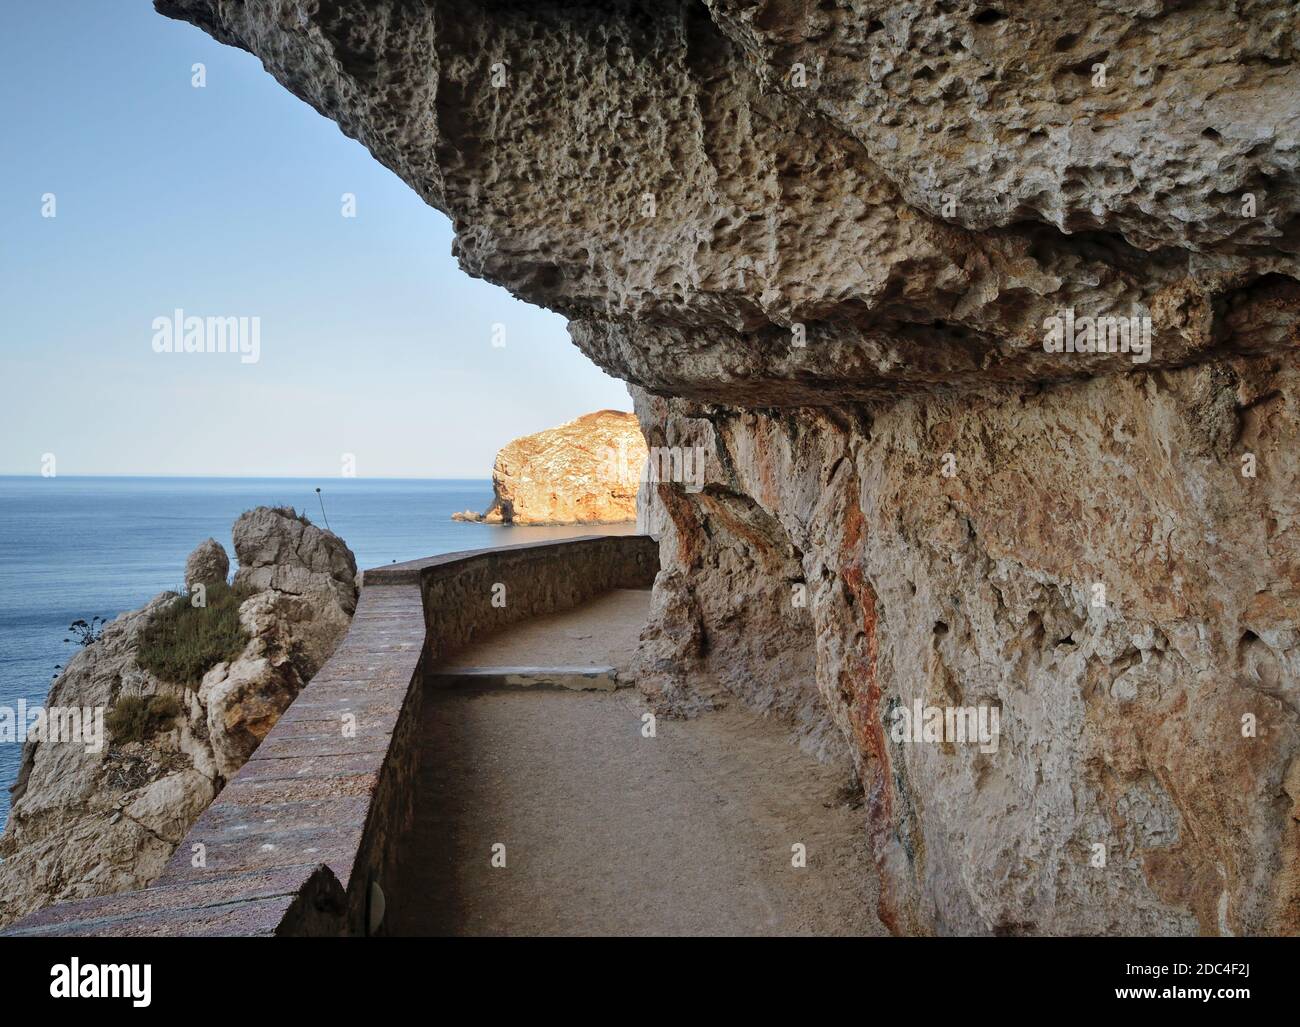 glimpse of the stairway called Escala del Cabirol carved on the rock of the Capo Caccia promontory that leads to the Grotte di Nettuno in the Mediterr Stock Photo